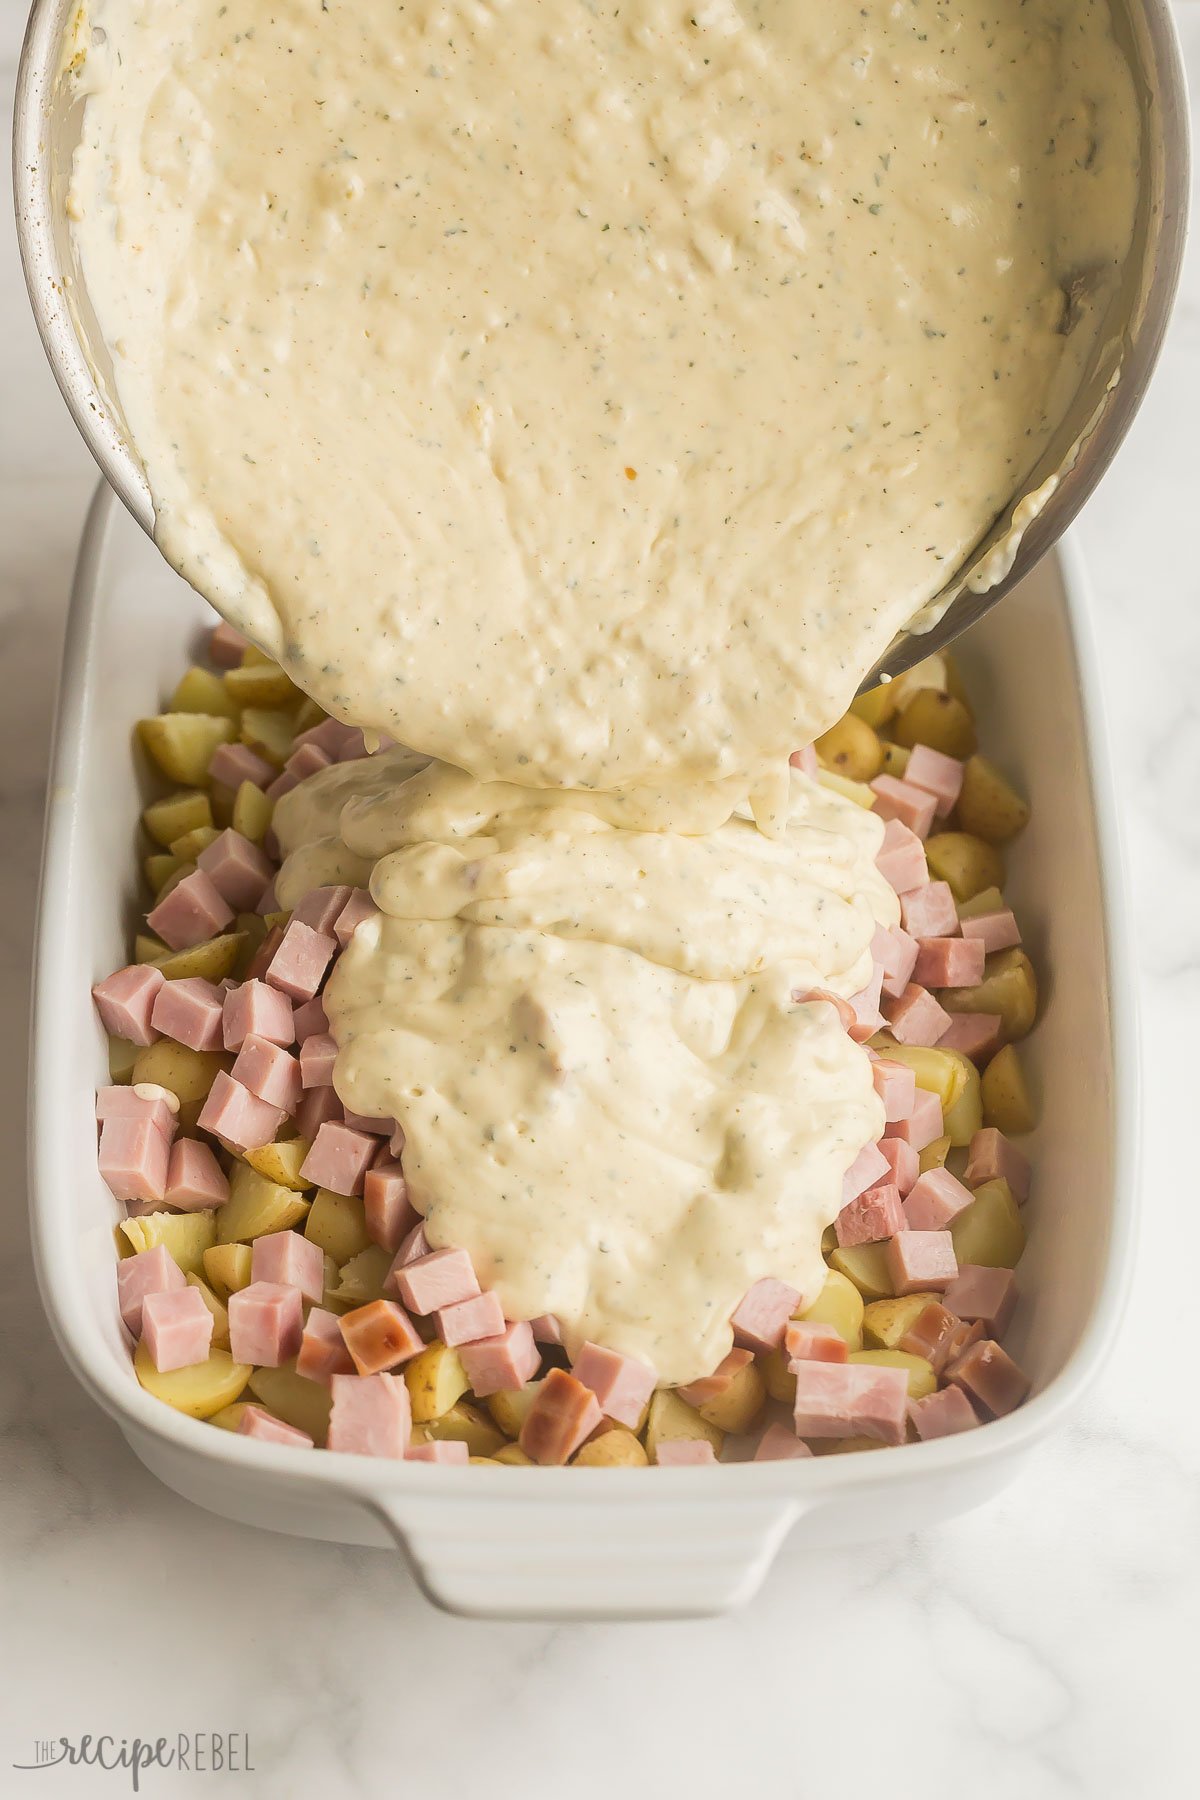 creamy sauce poured over ham and potatoes in casserole dish